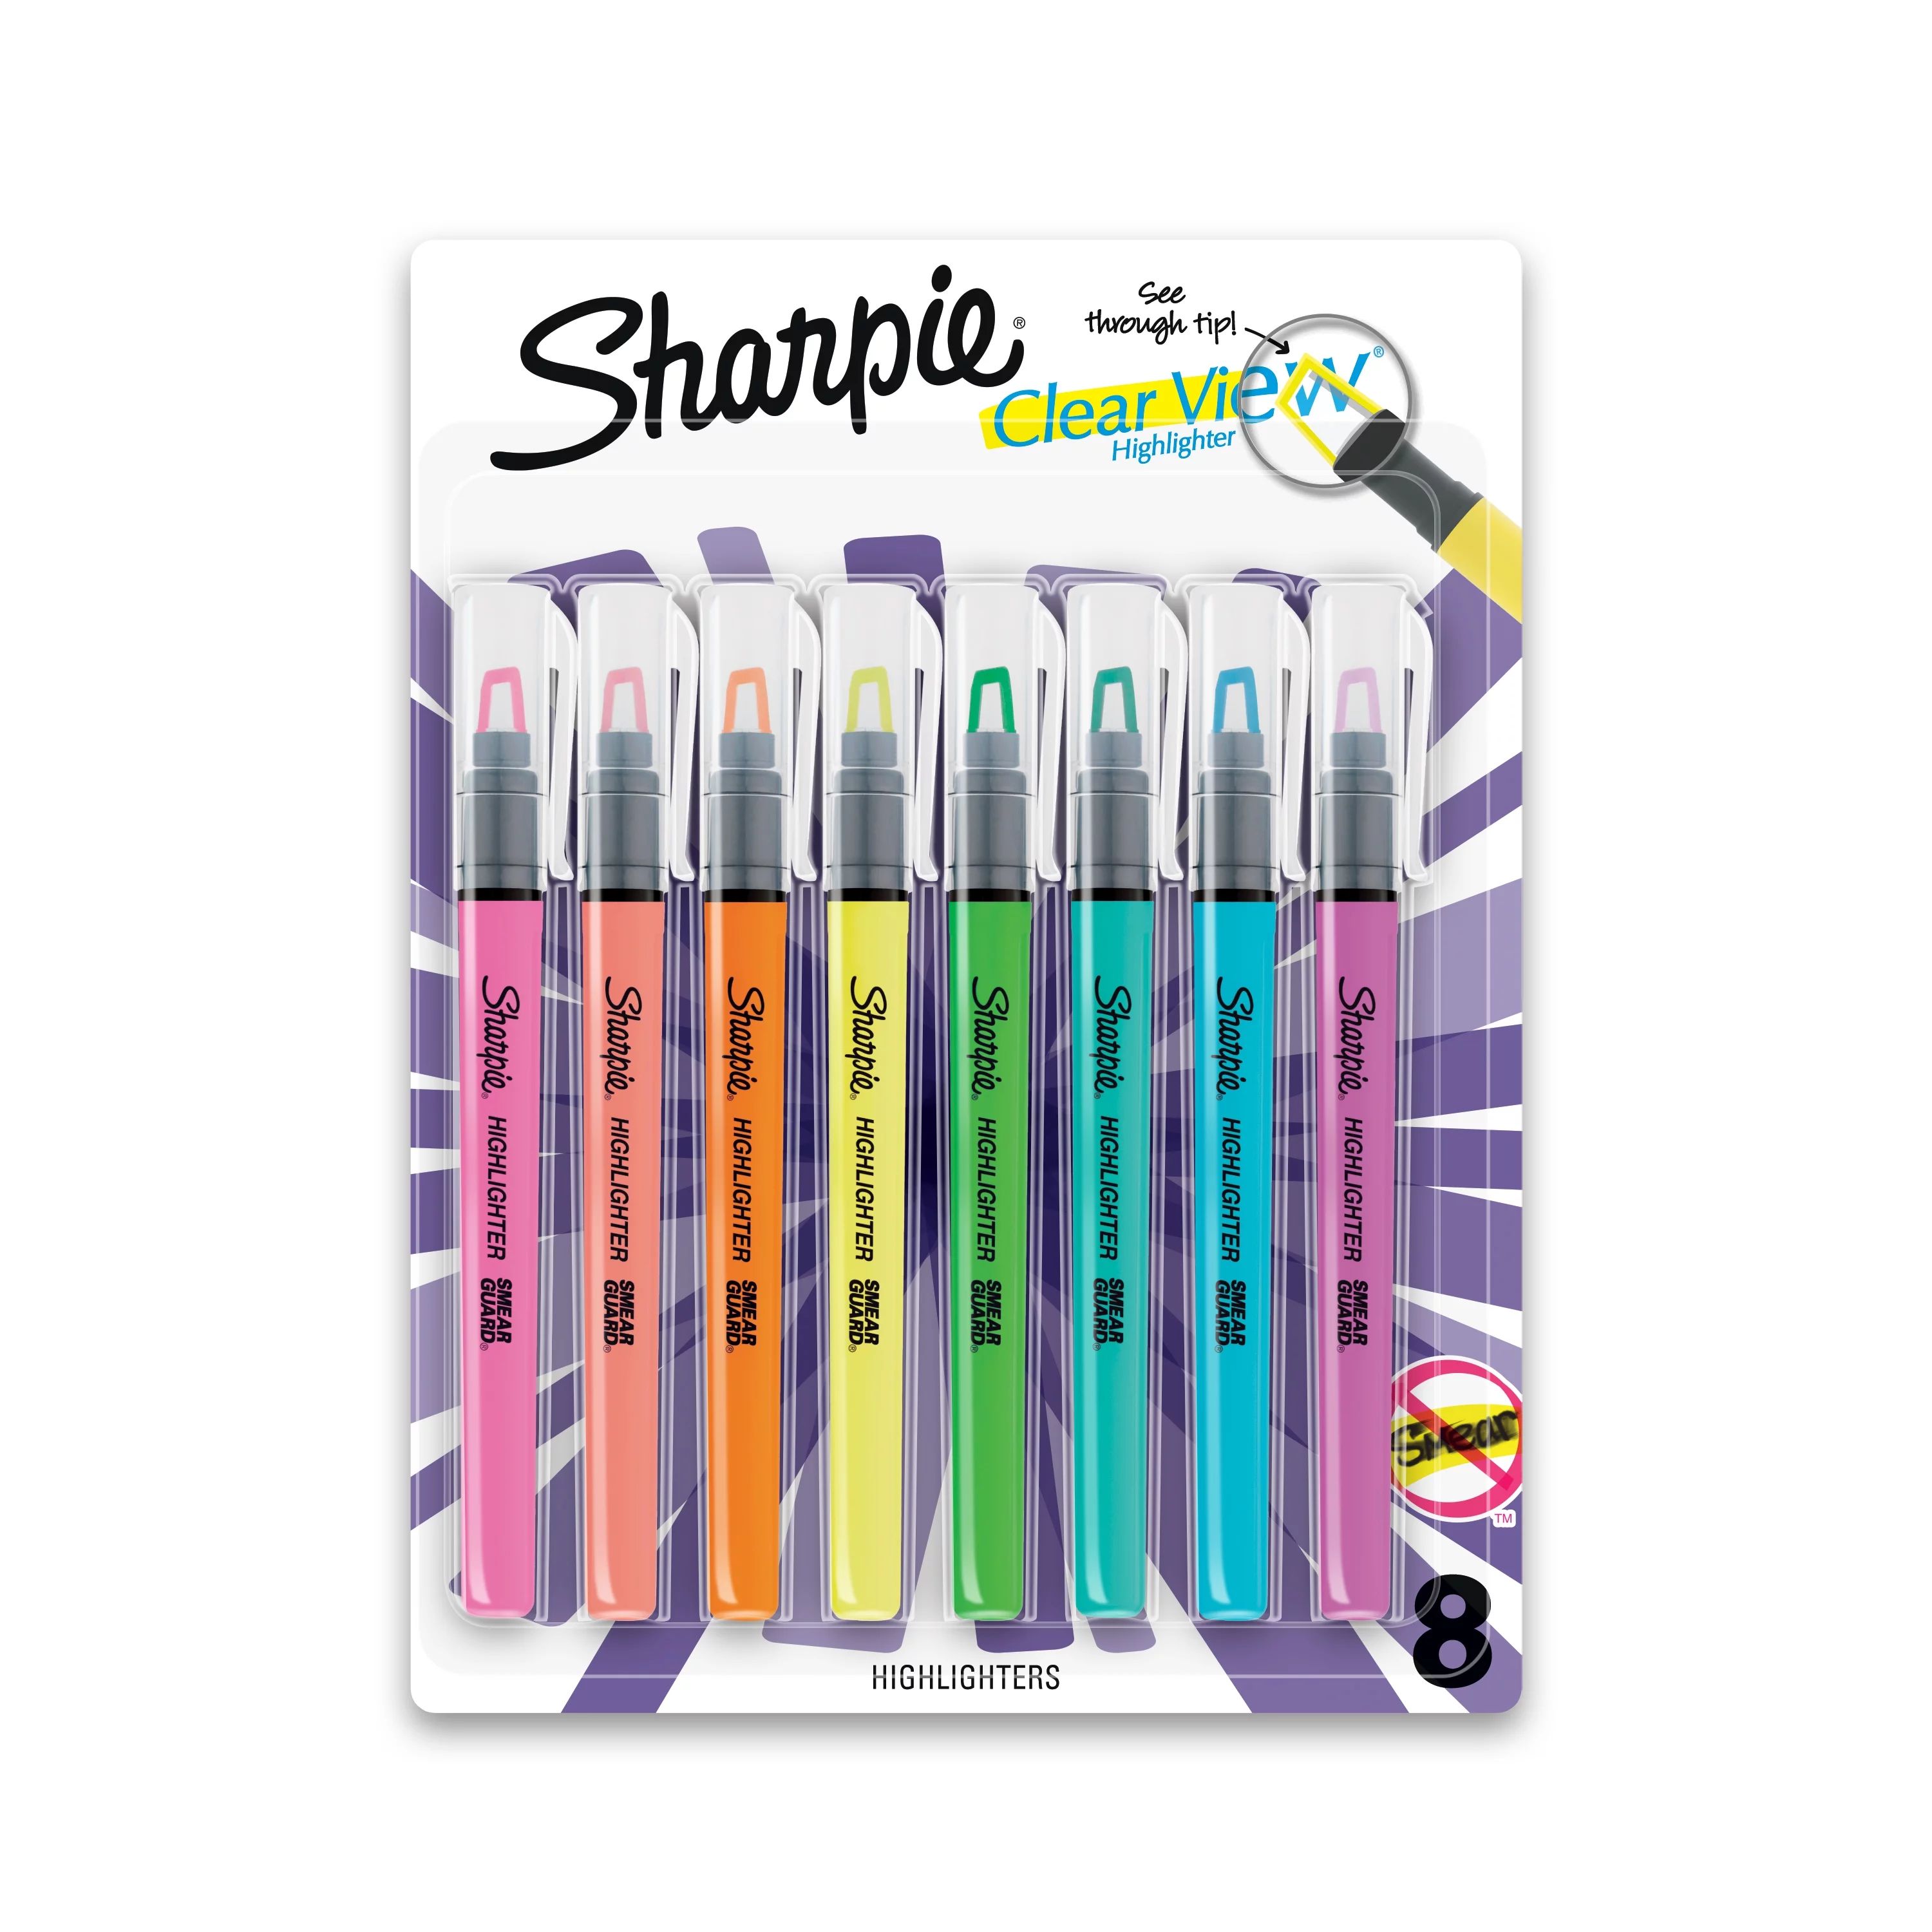 Sharpie Clear View Highlighter, Pocket Highlighter, Assorted, 8 Count | Walmart (US)